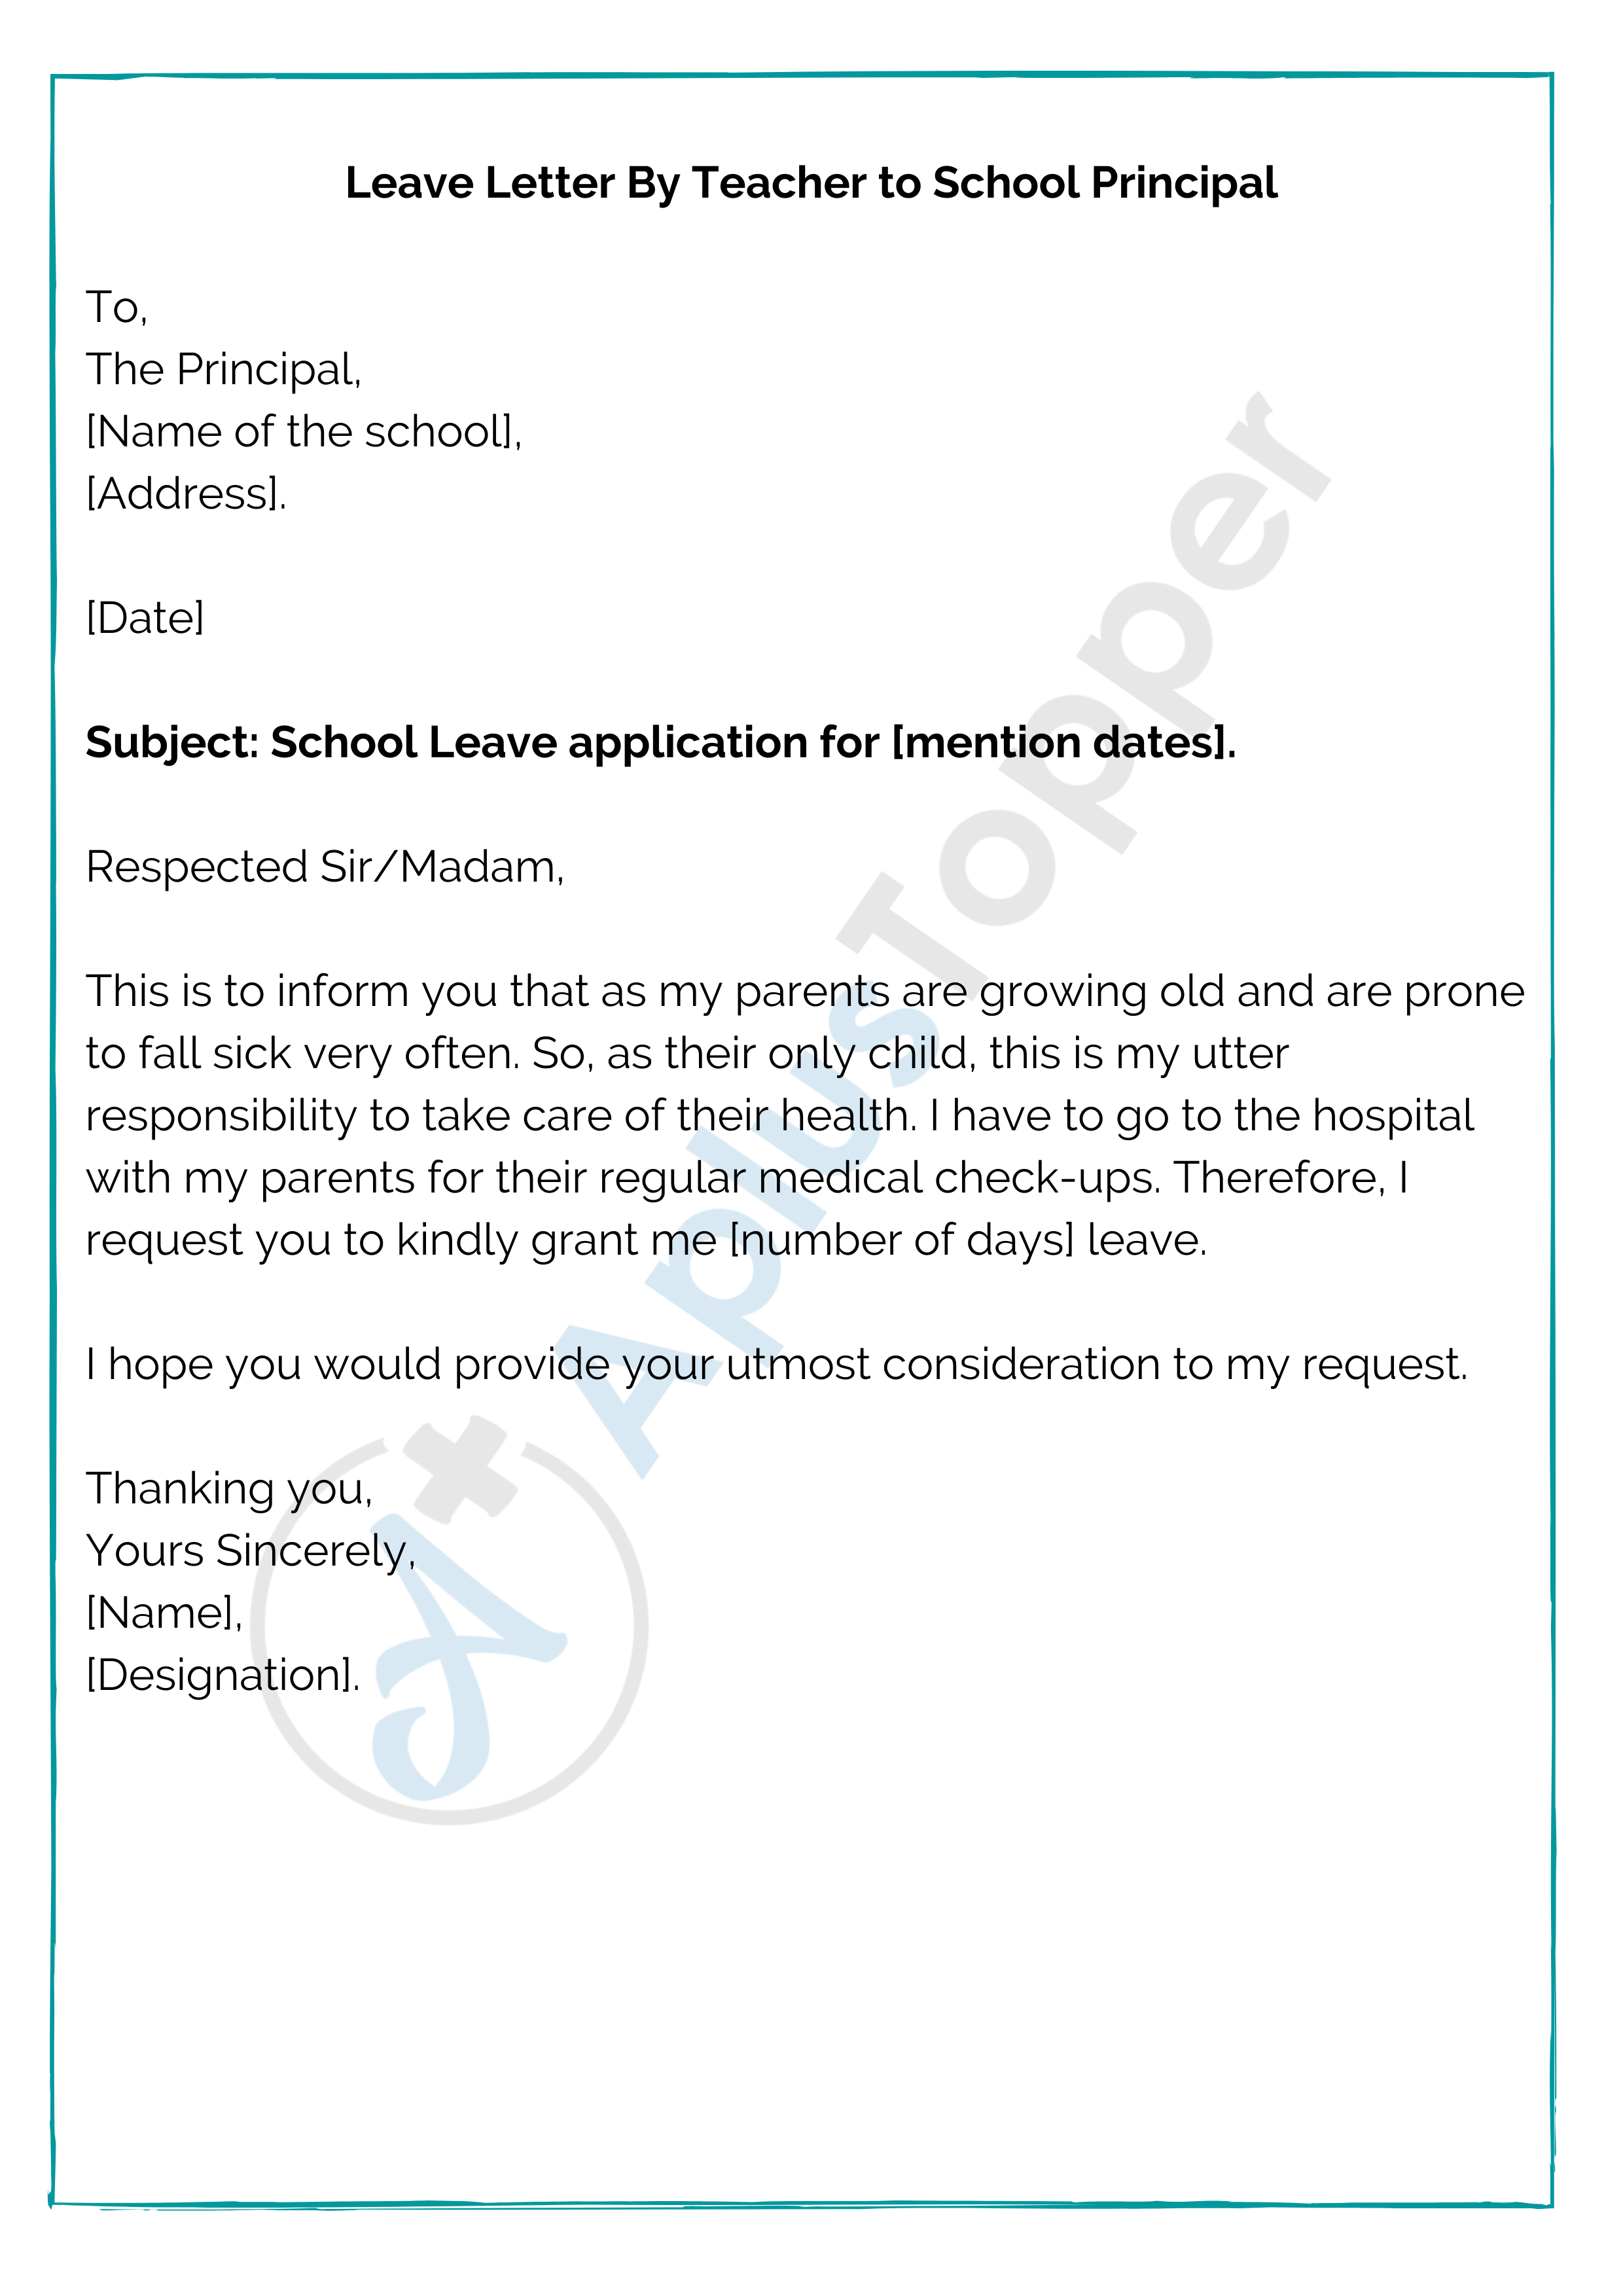 leave application letter to principal by teacher